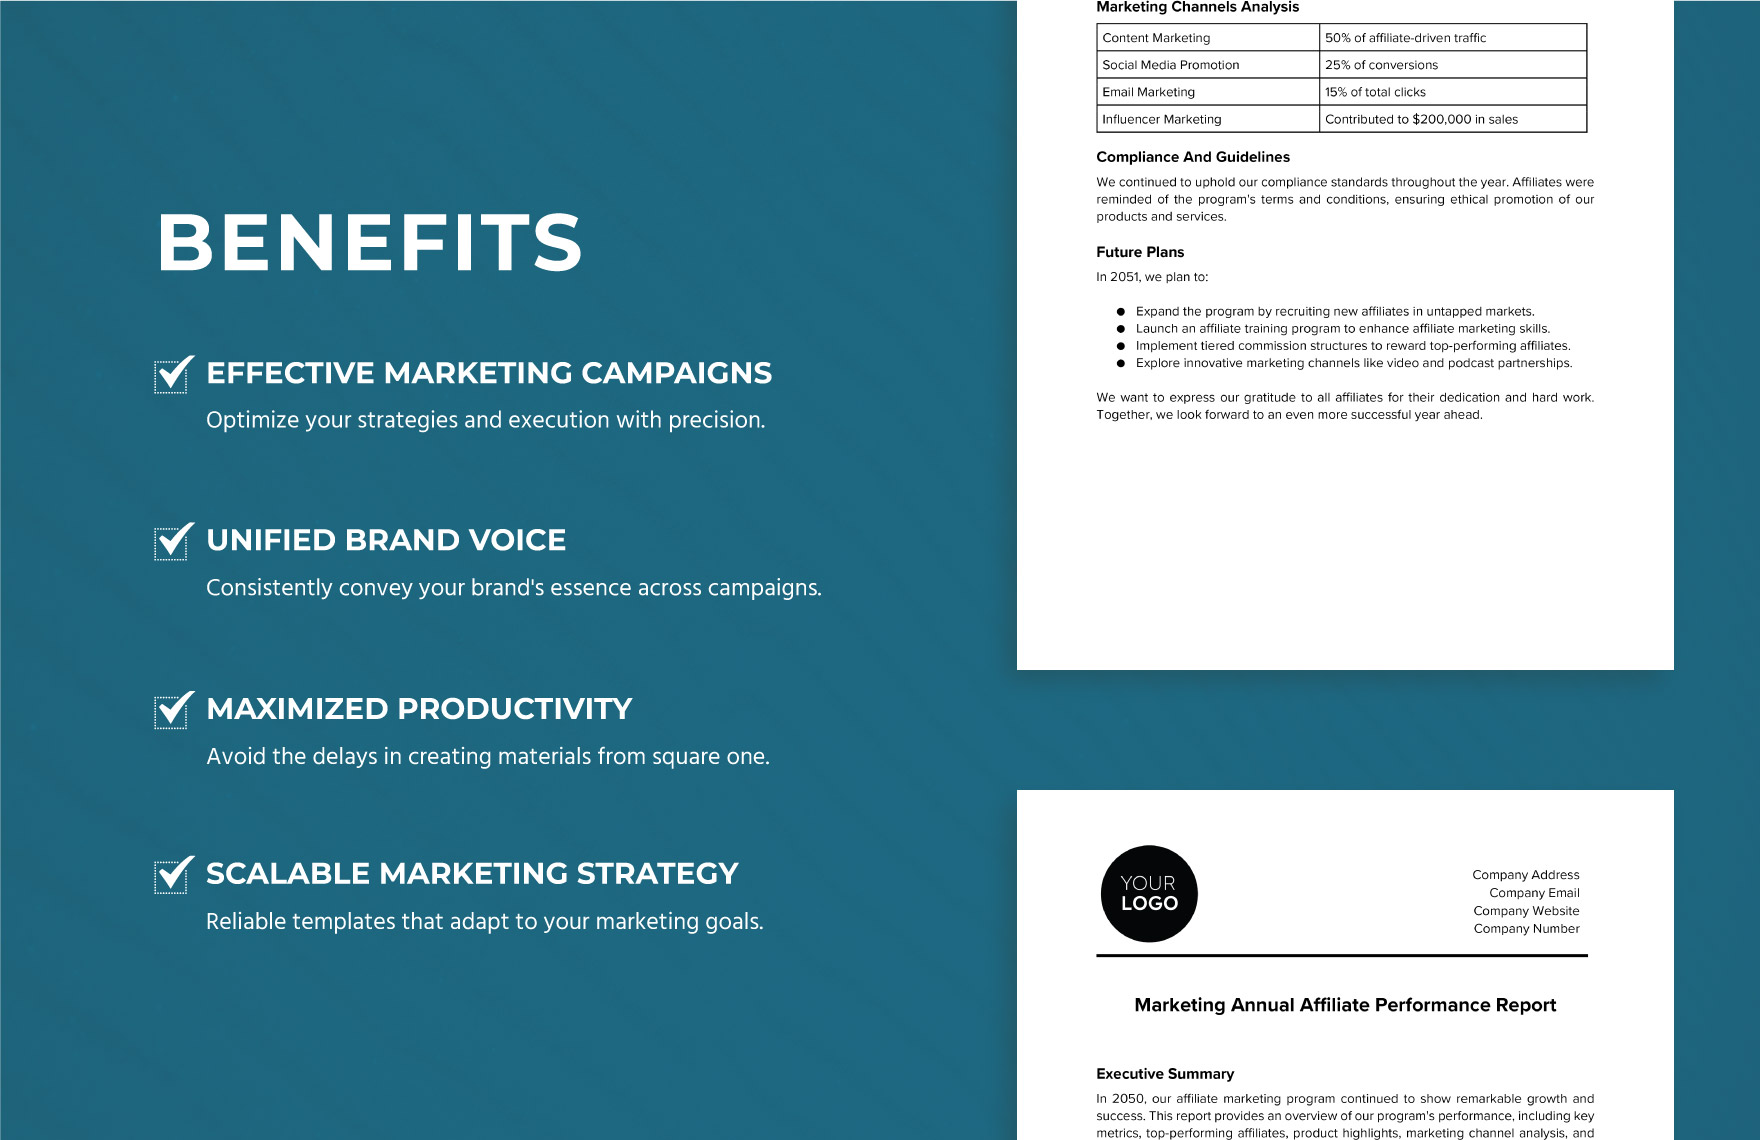 Marketing Annual Affiliate Performance Report Template